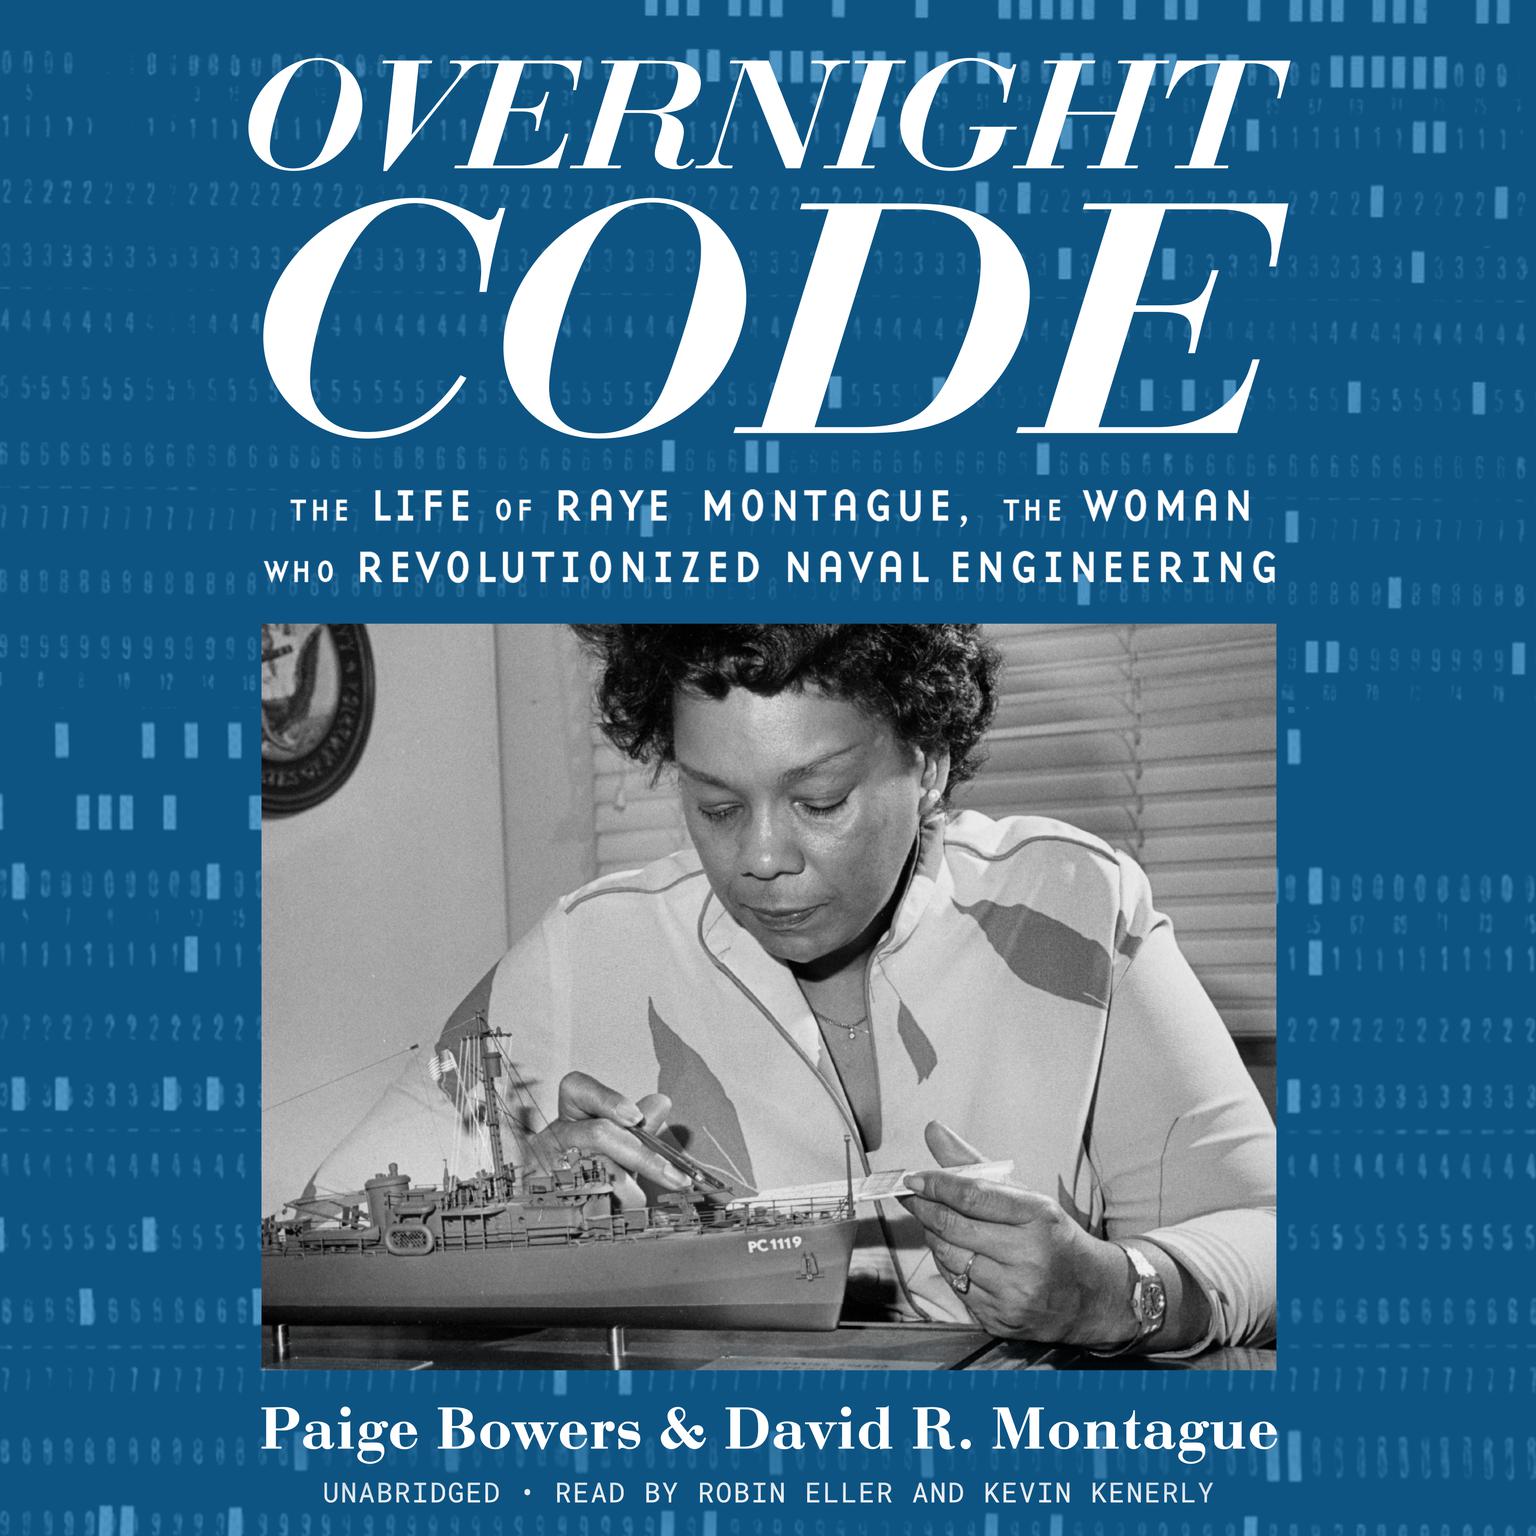 Overnight Code: The Life of Raye Montague, the Woman Who Revolutionized Naval Engineering Audiobook, by Paige Bowers